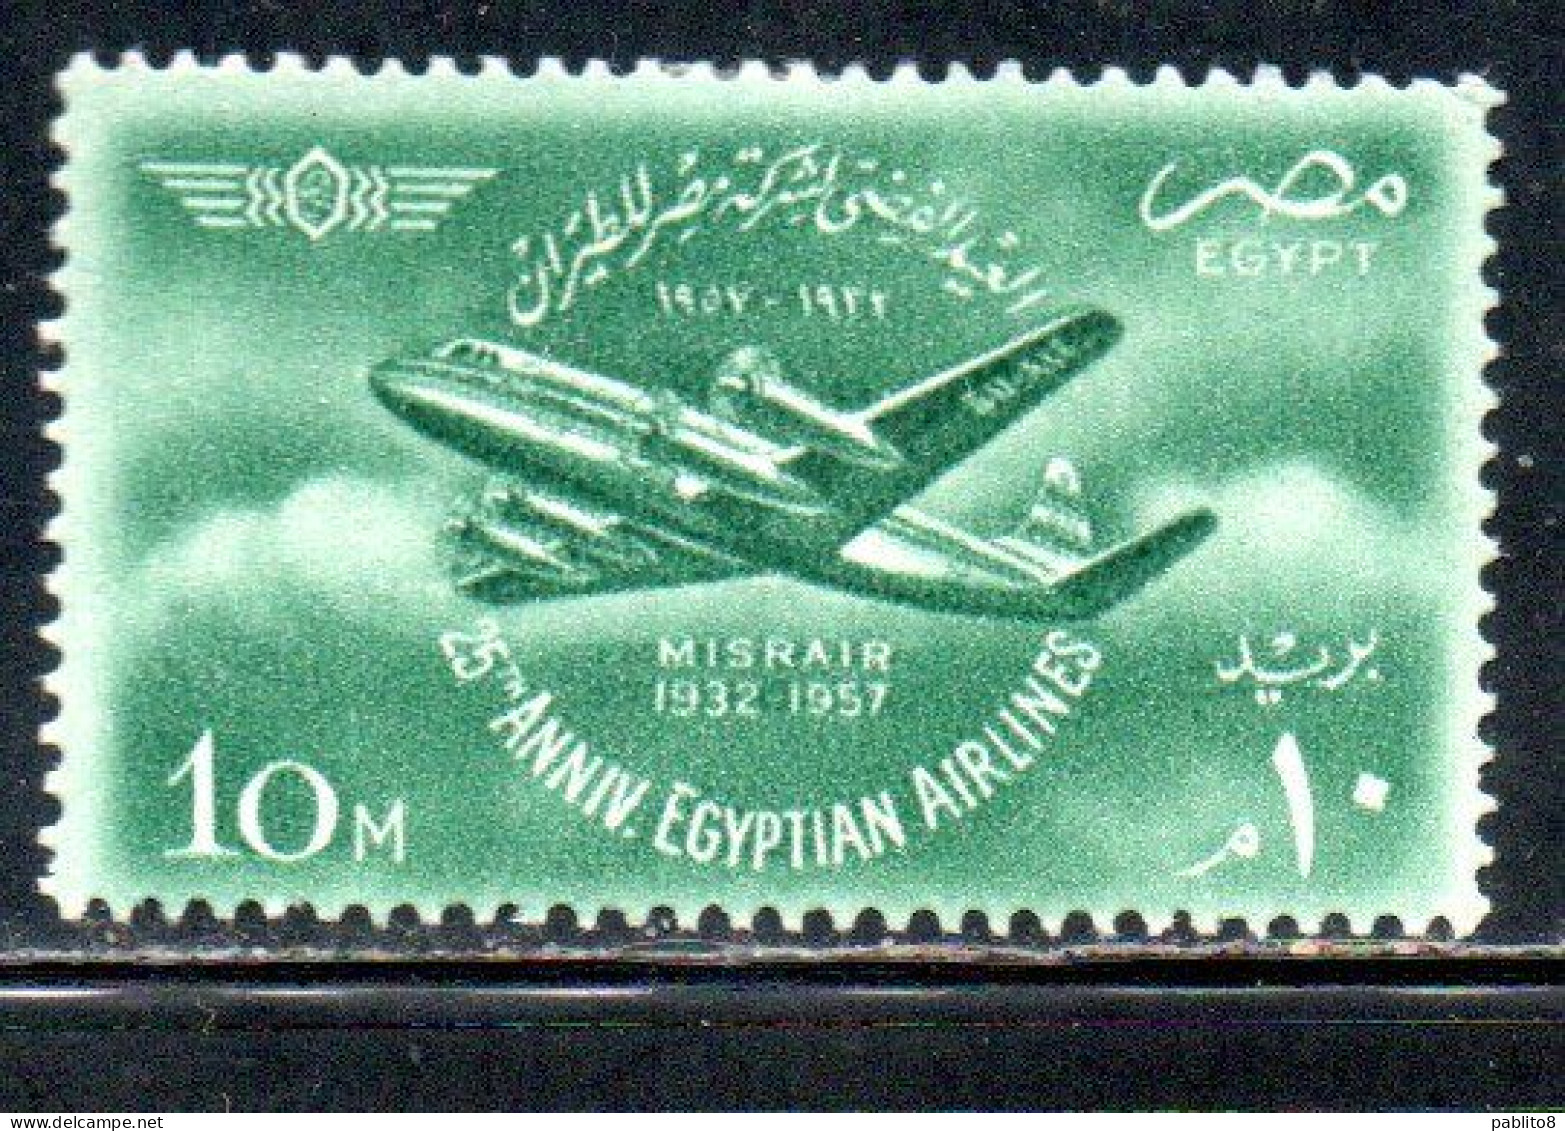 UAR EGYPT EGITTO 1957 EGYPTIAN AIR FORCE AND OF MISRAIR AIRLINE VISCOUNT PLANE 10m MH - Ungebraucht